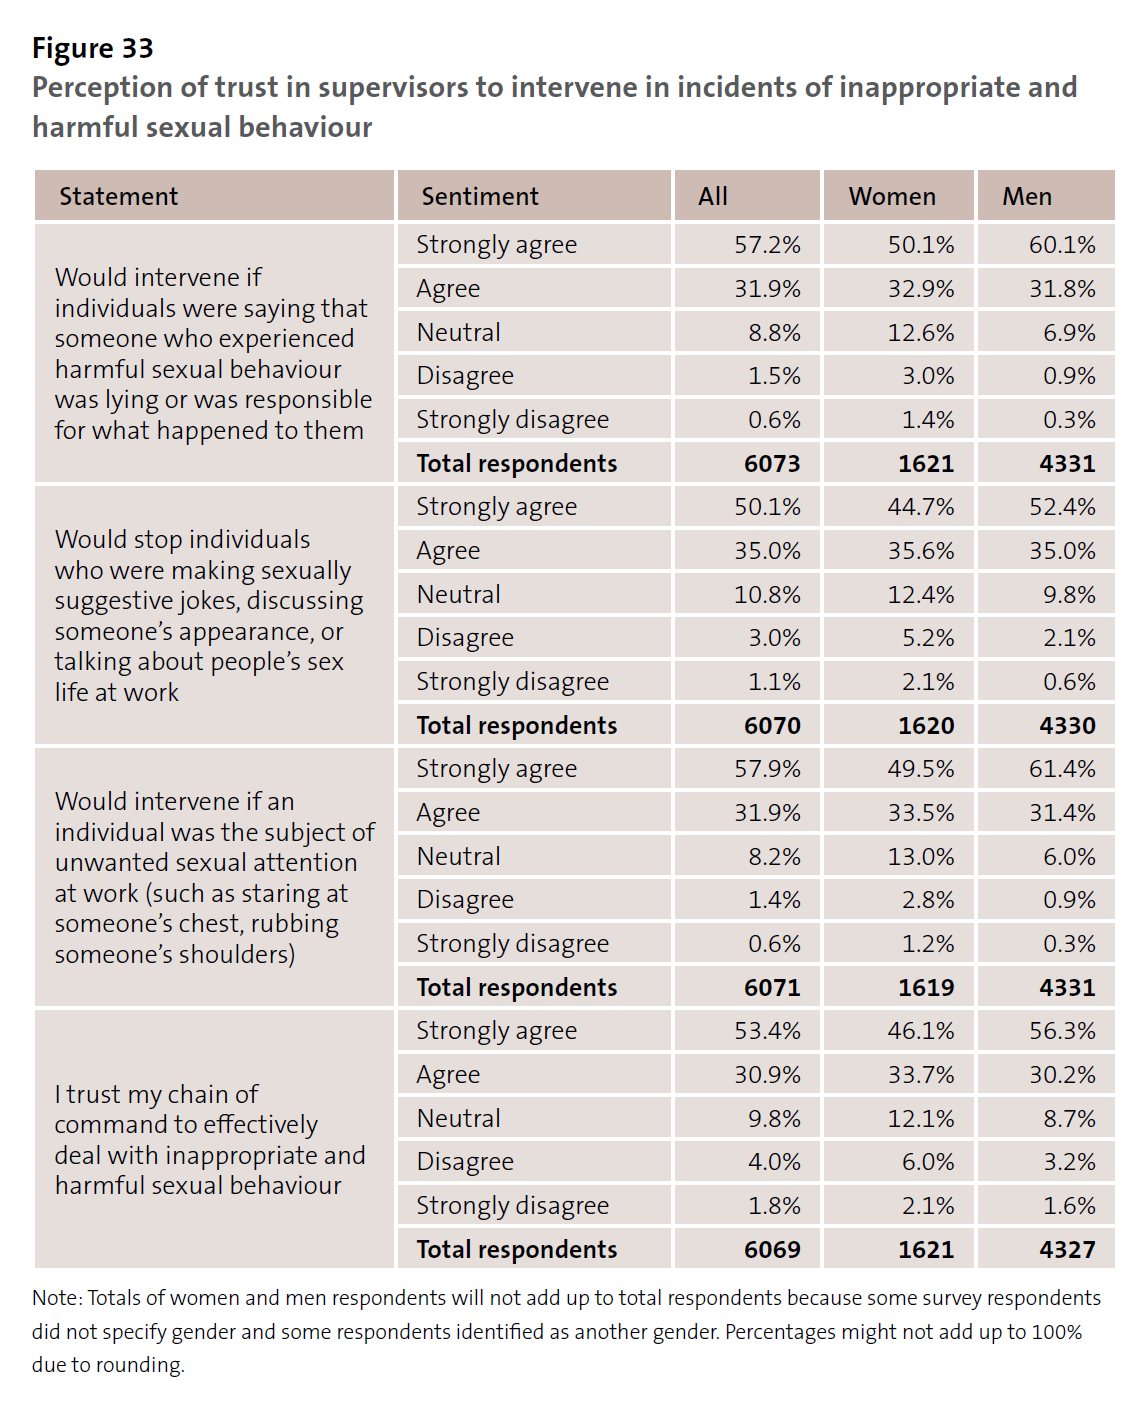 Figure 33 - Perception of trust in supervisors to intervene in incidents of inappropriate and harmful sexual behaviour